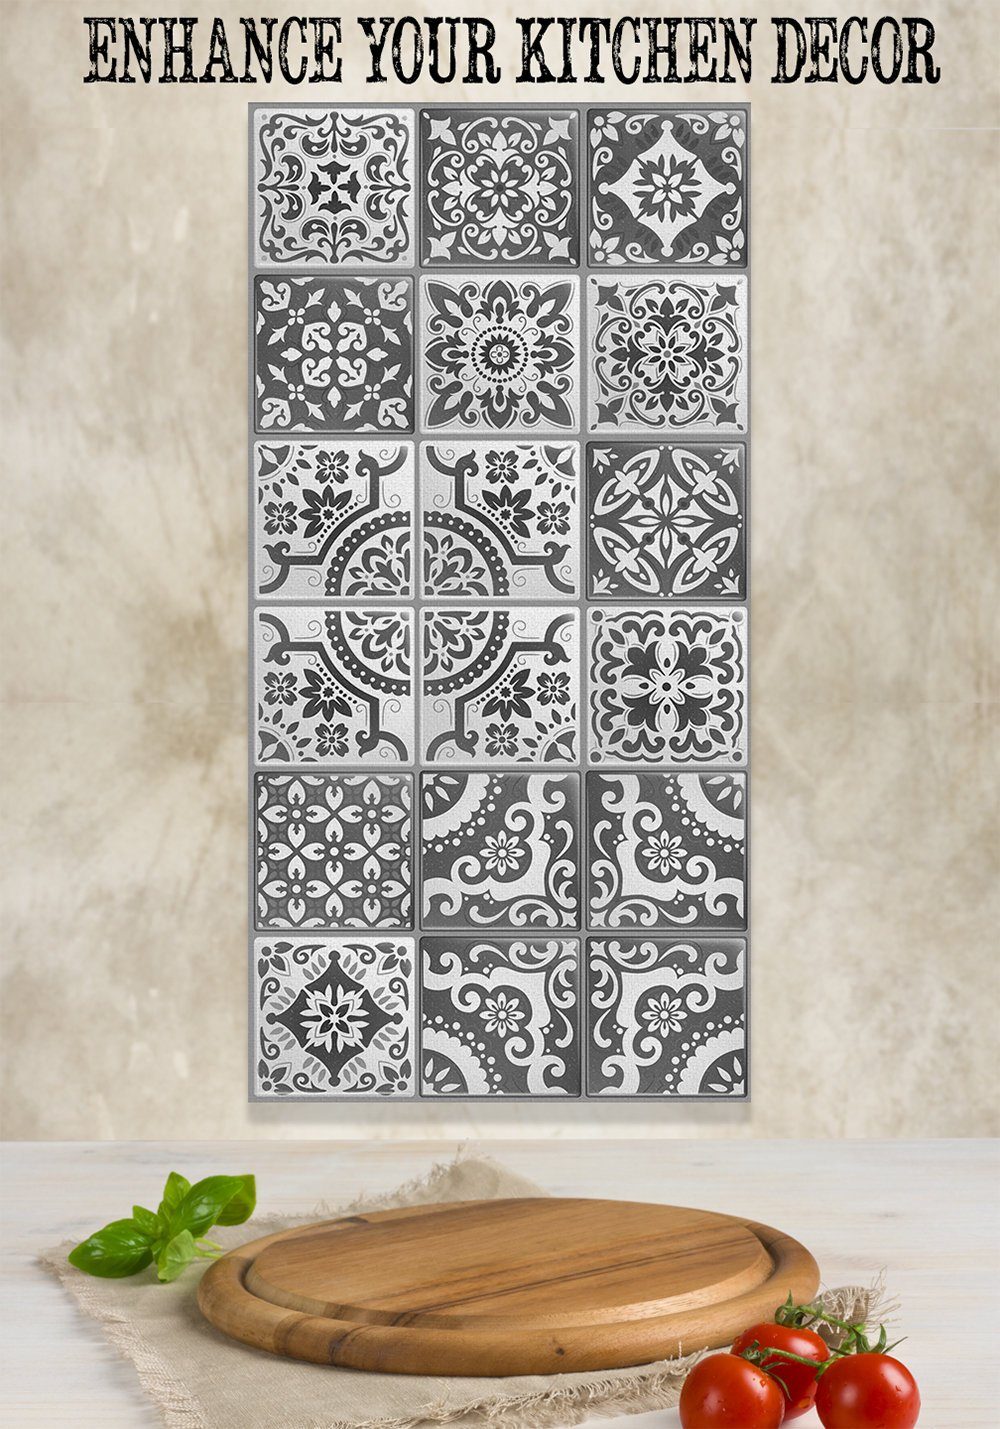 Mexican Tile Grey Shades - Canvas | Lone Star Art.